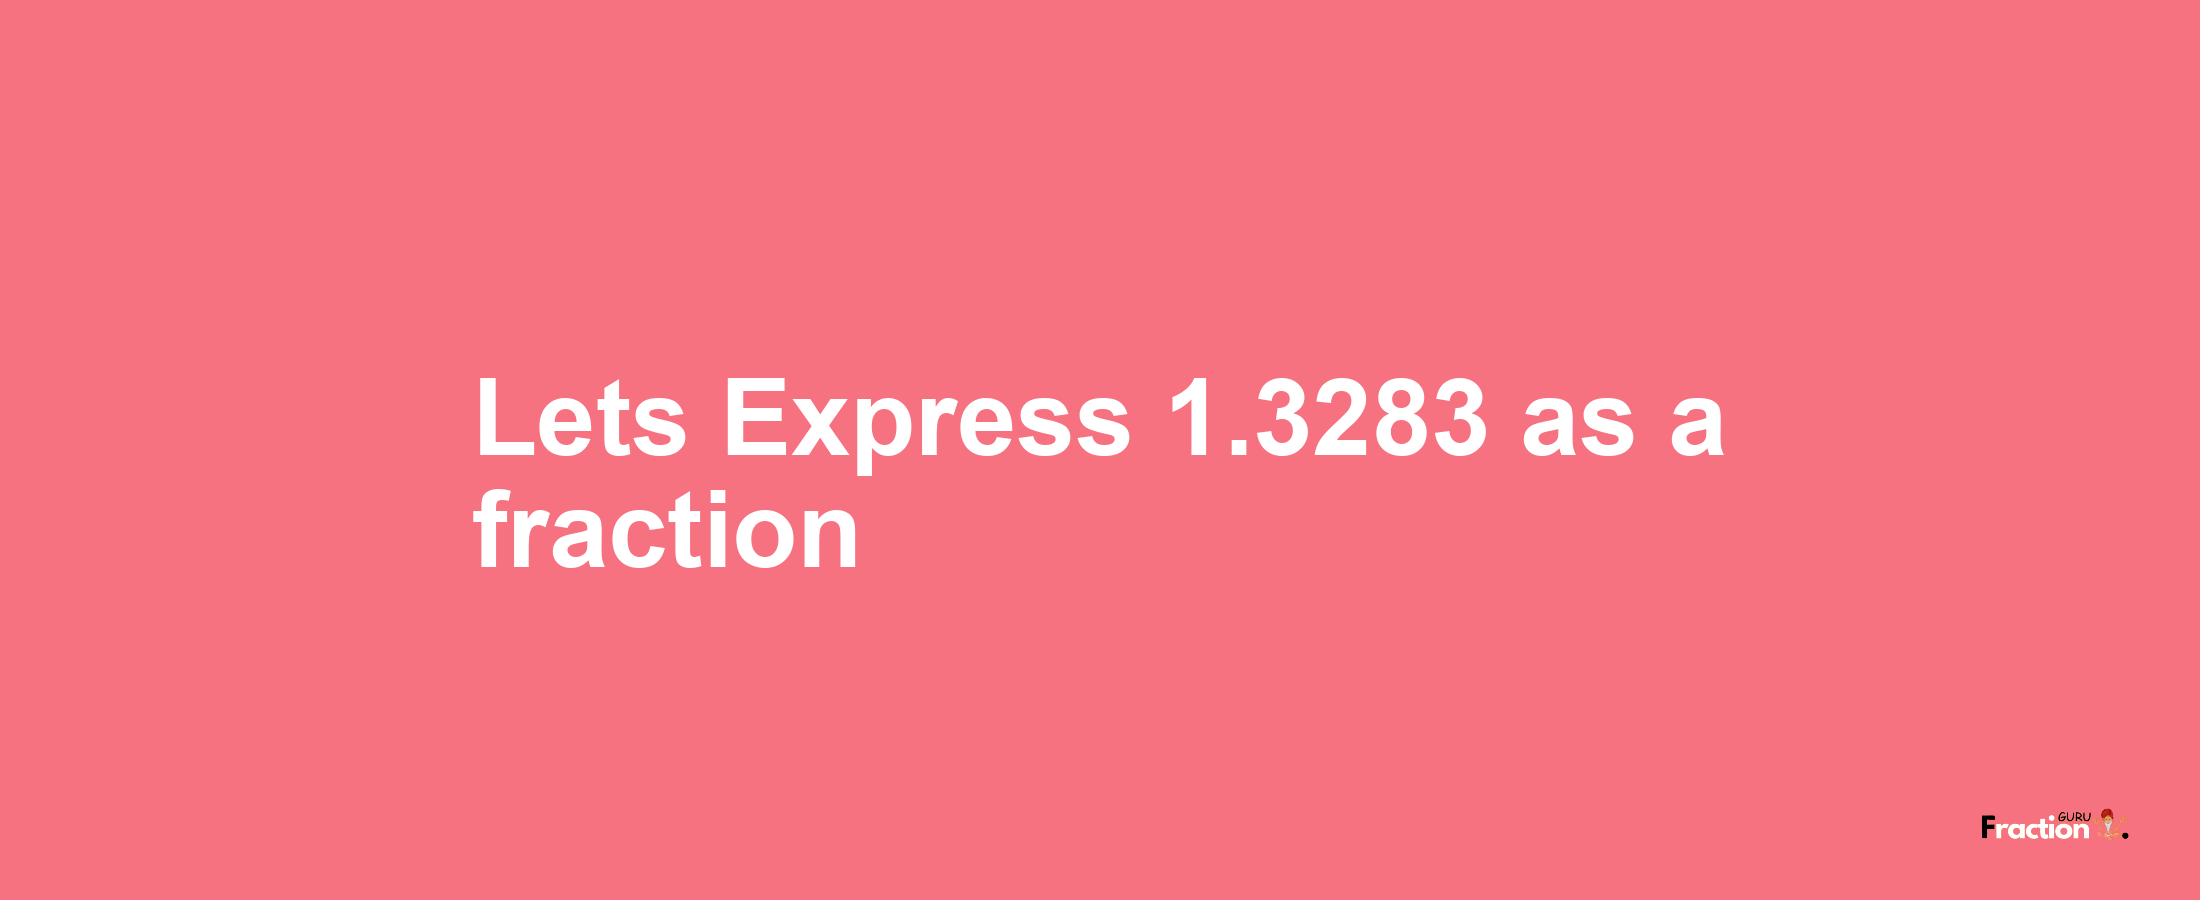 Lets Express 1.3283 as afraction